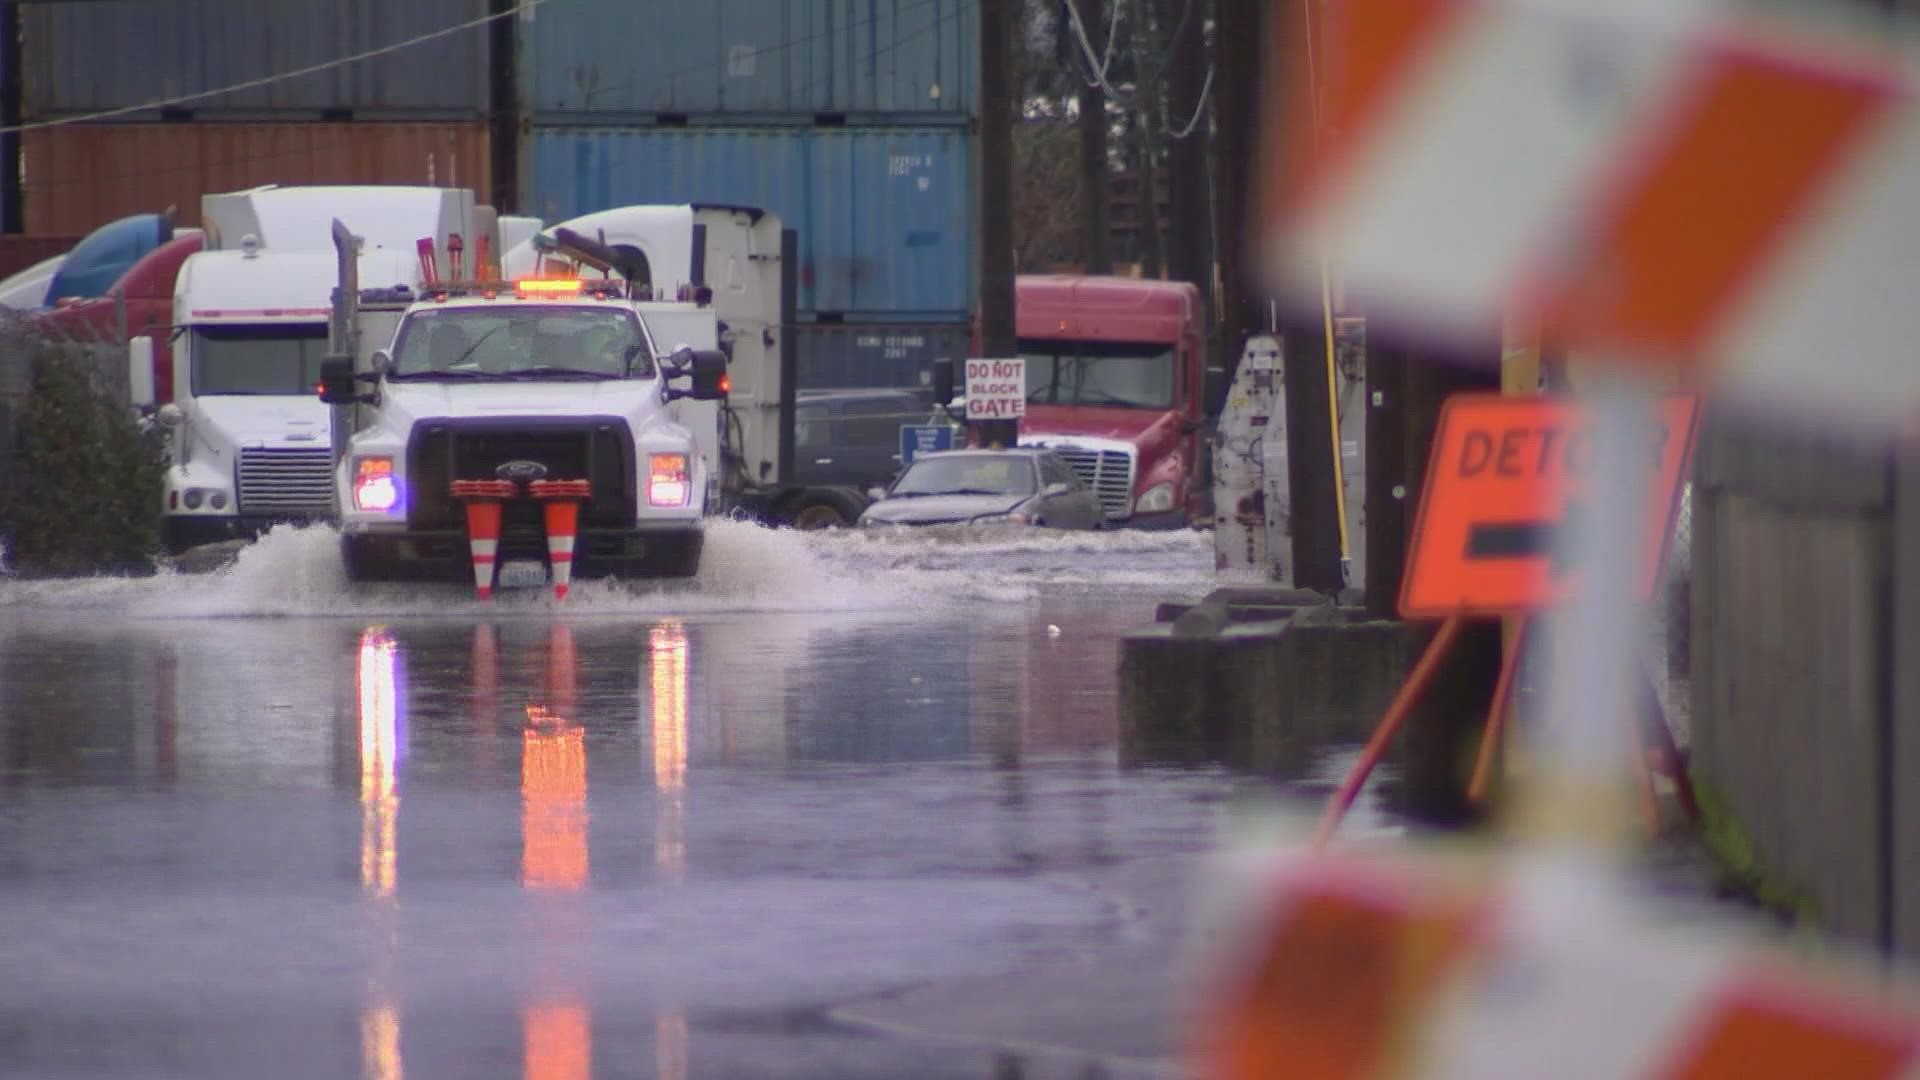 Several infrastructure projects are underway, but Seattle Public Utilities says they will not ultimately prevent the Duwamish River from overtopping.